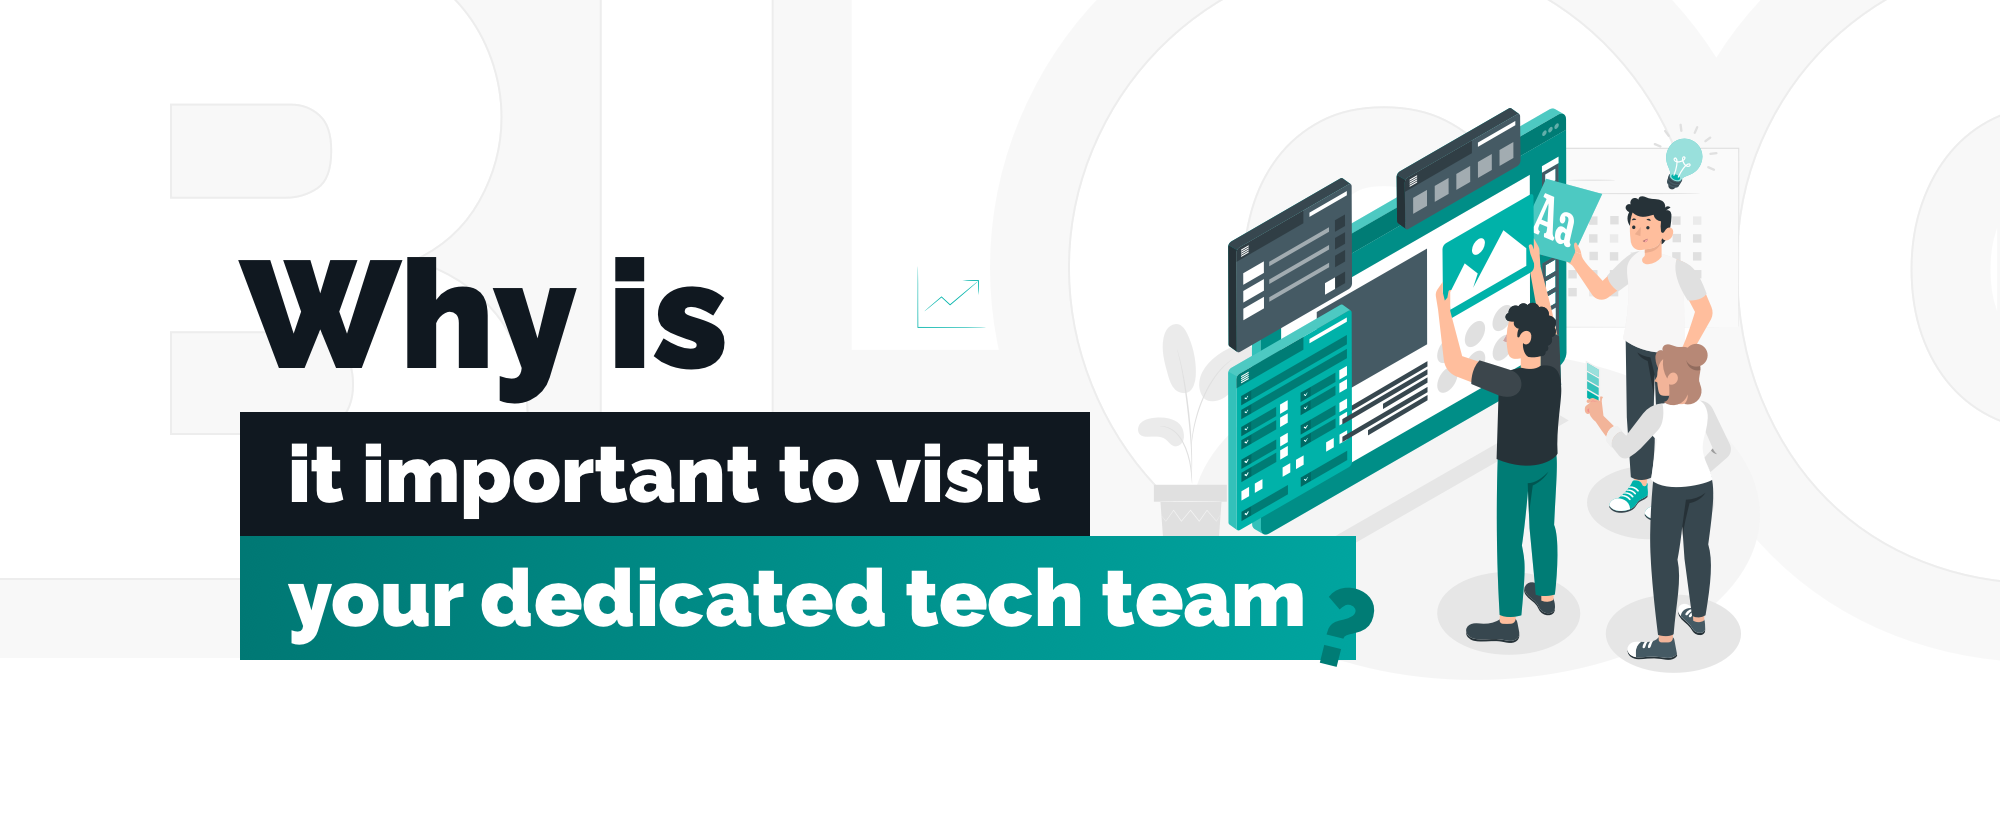 Why is it important to visit your dedicated tech team?